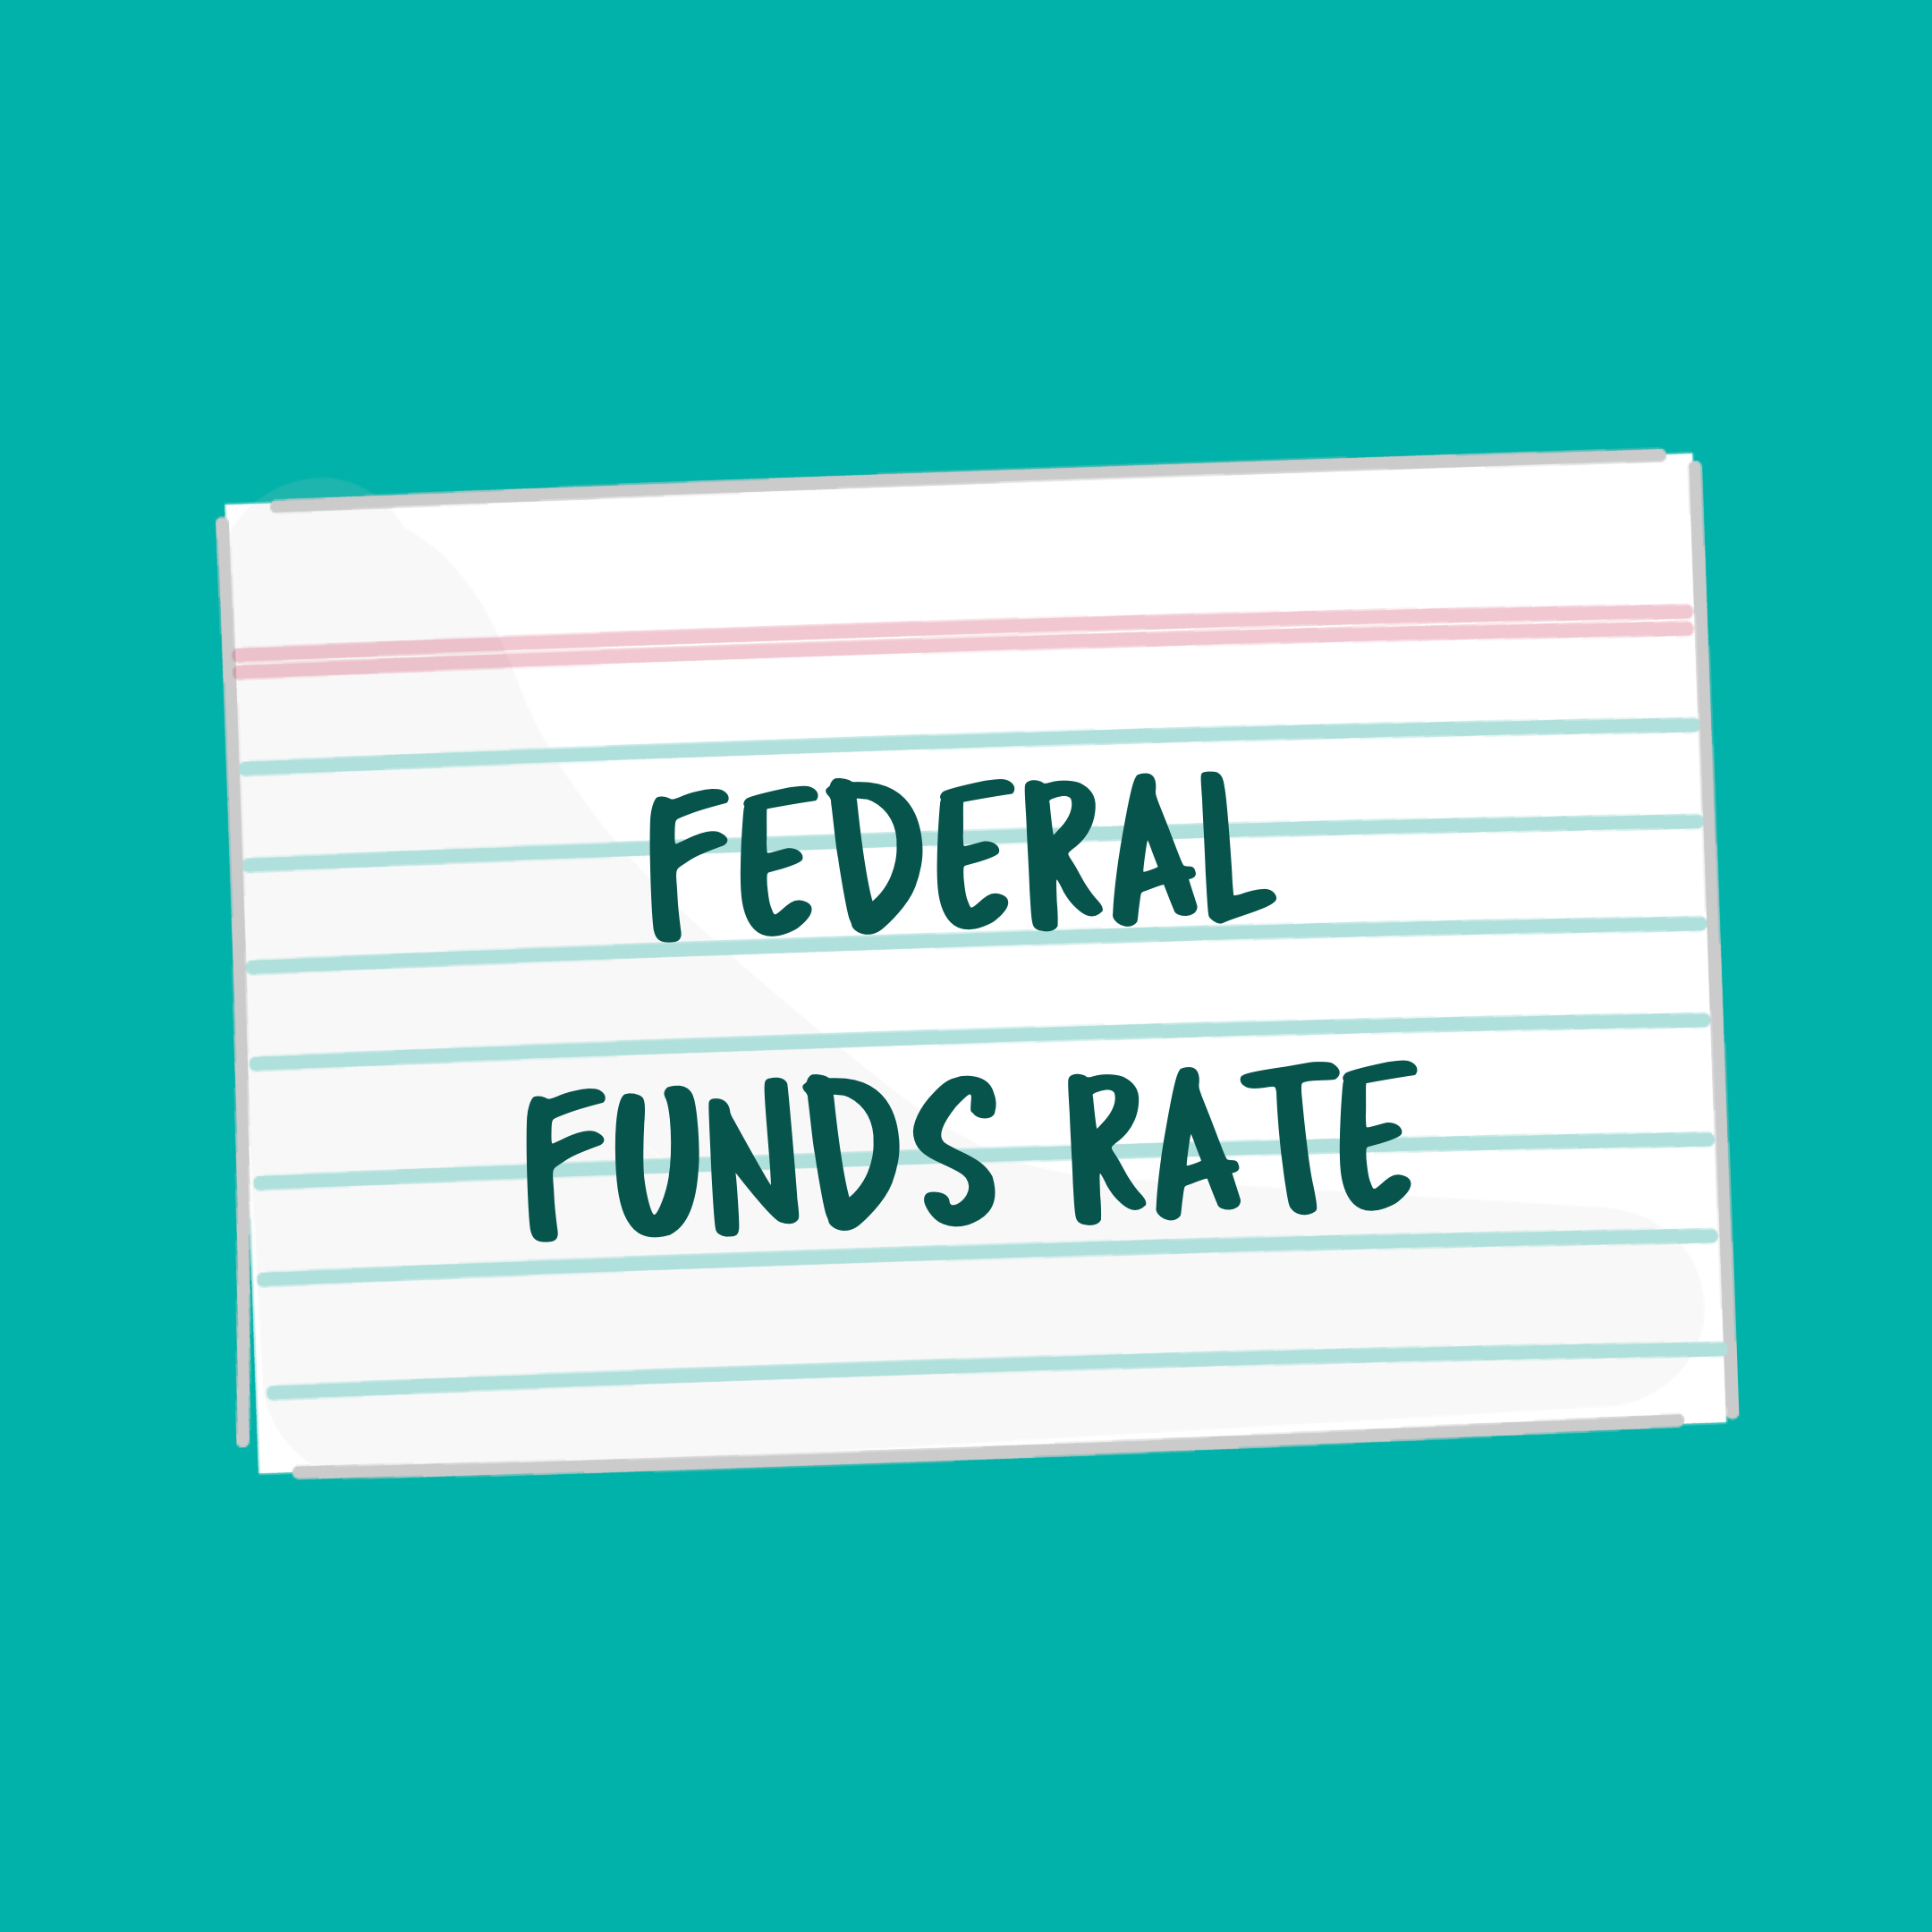 Federal Funds Rate card